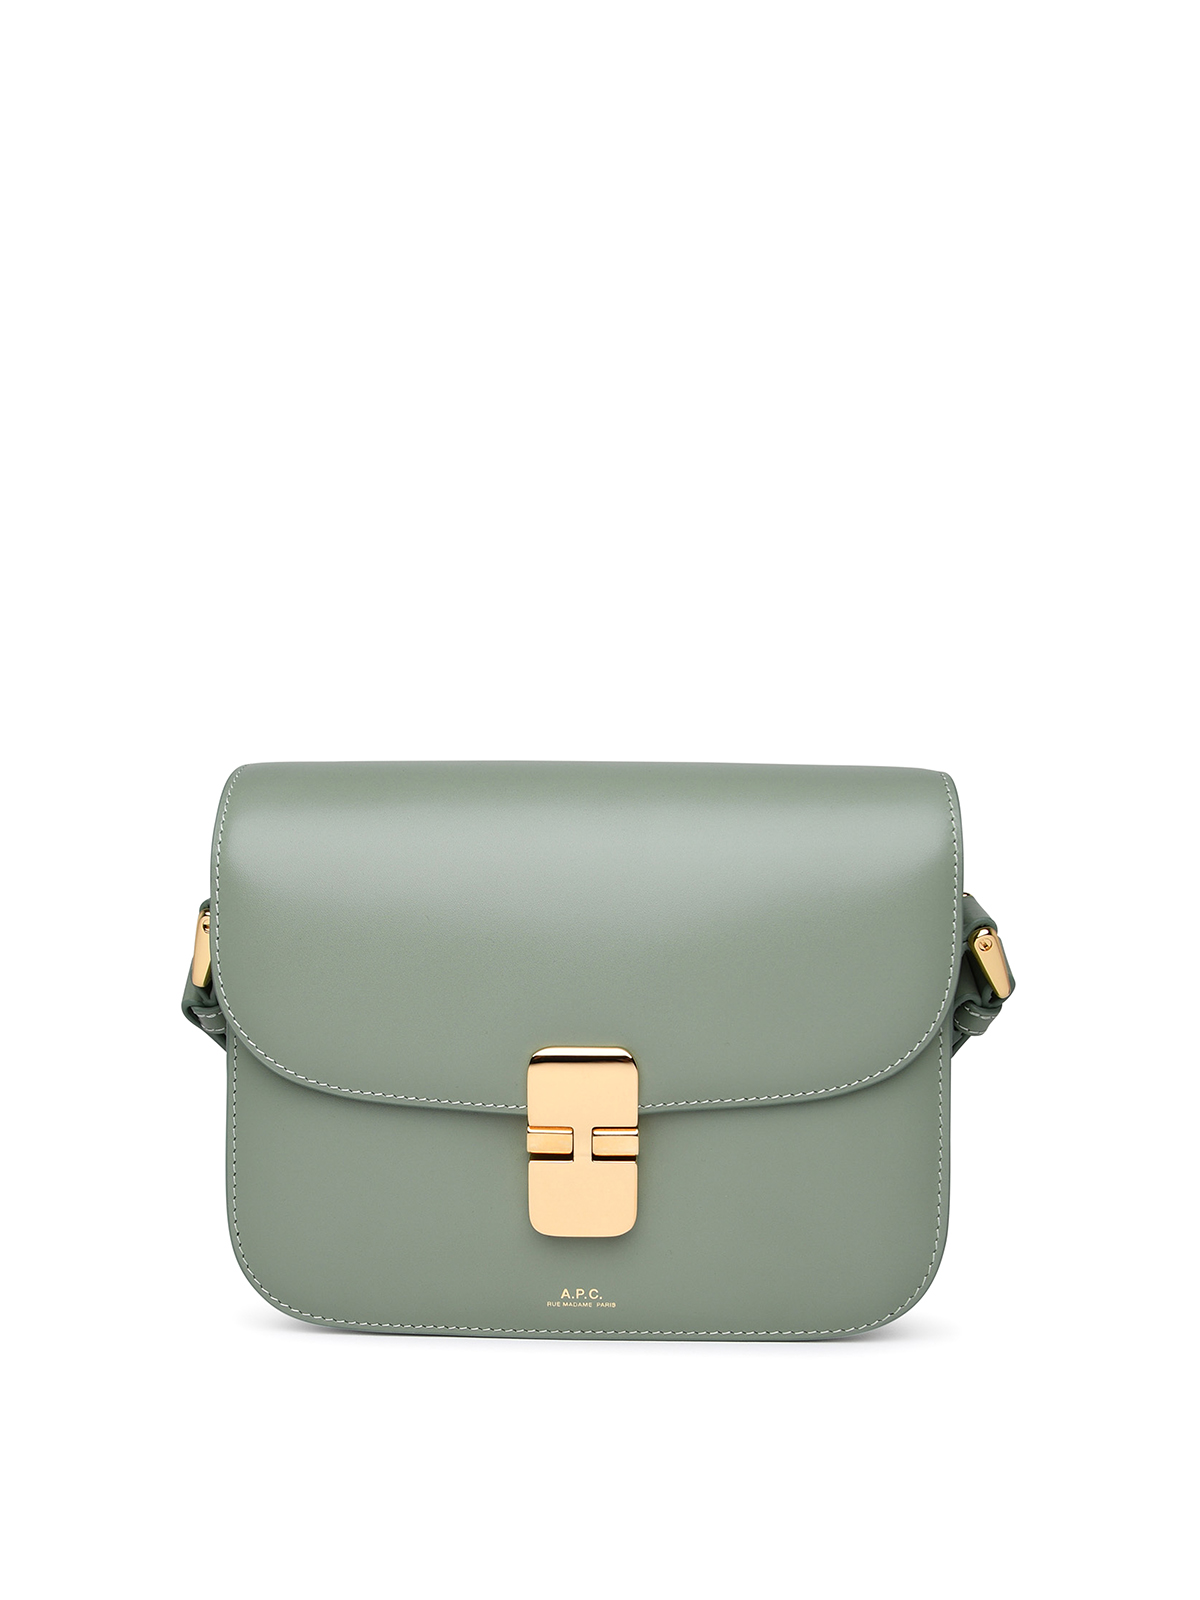 A.P.C. Small Grace Bag in Green